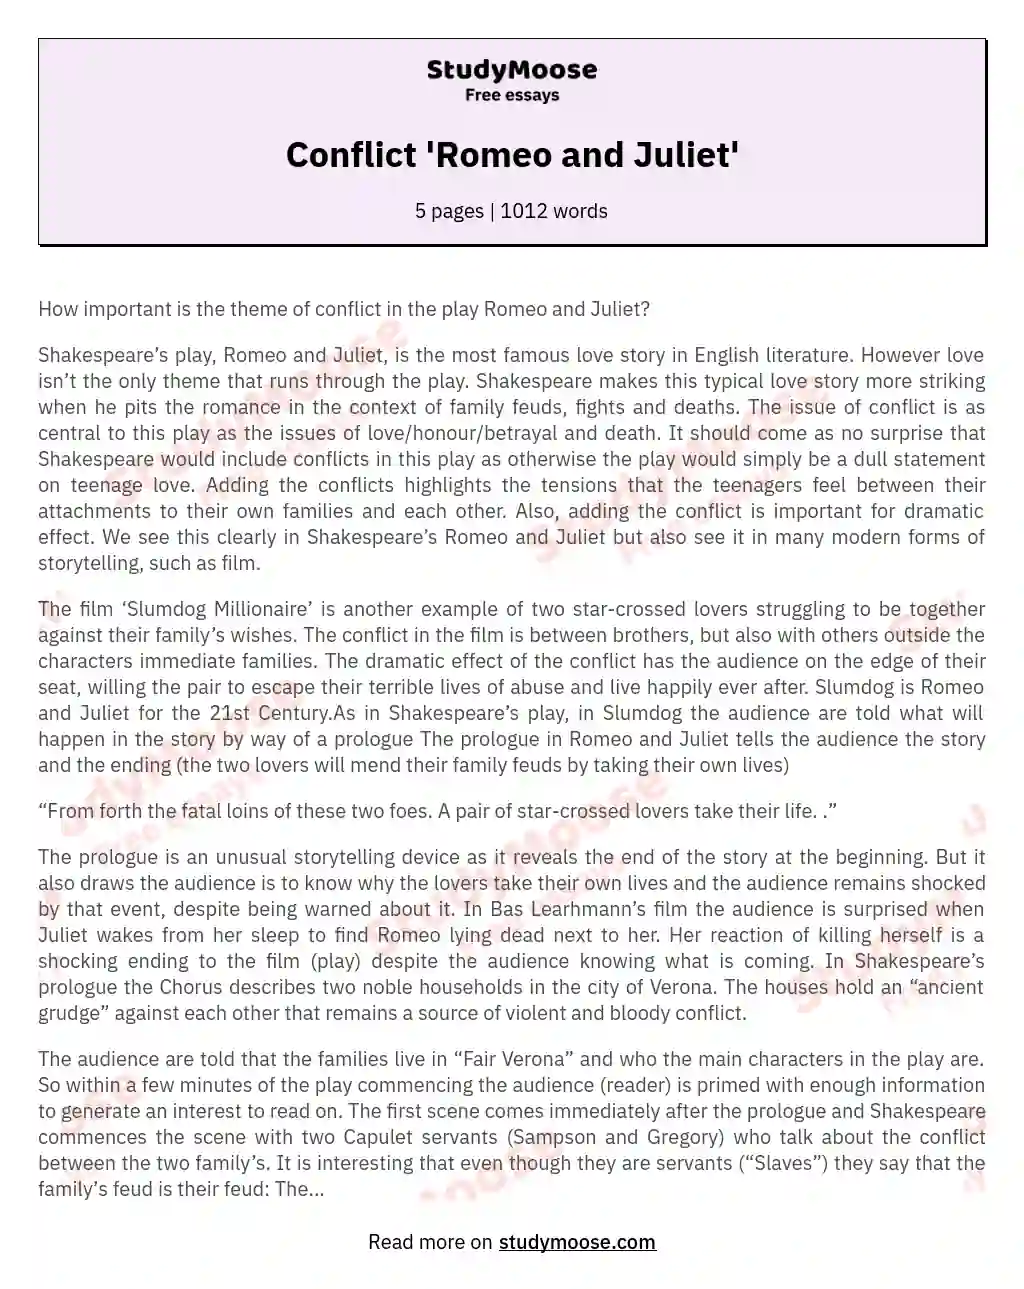 Conflict 'Romeo and Juliet' essay